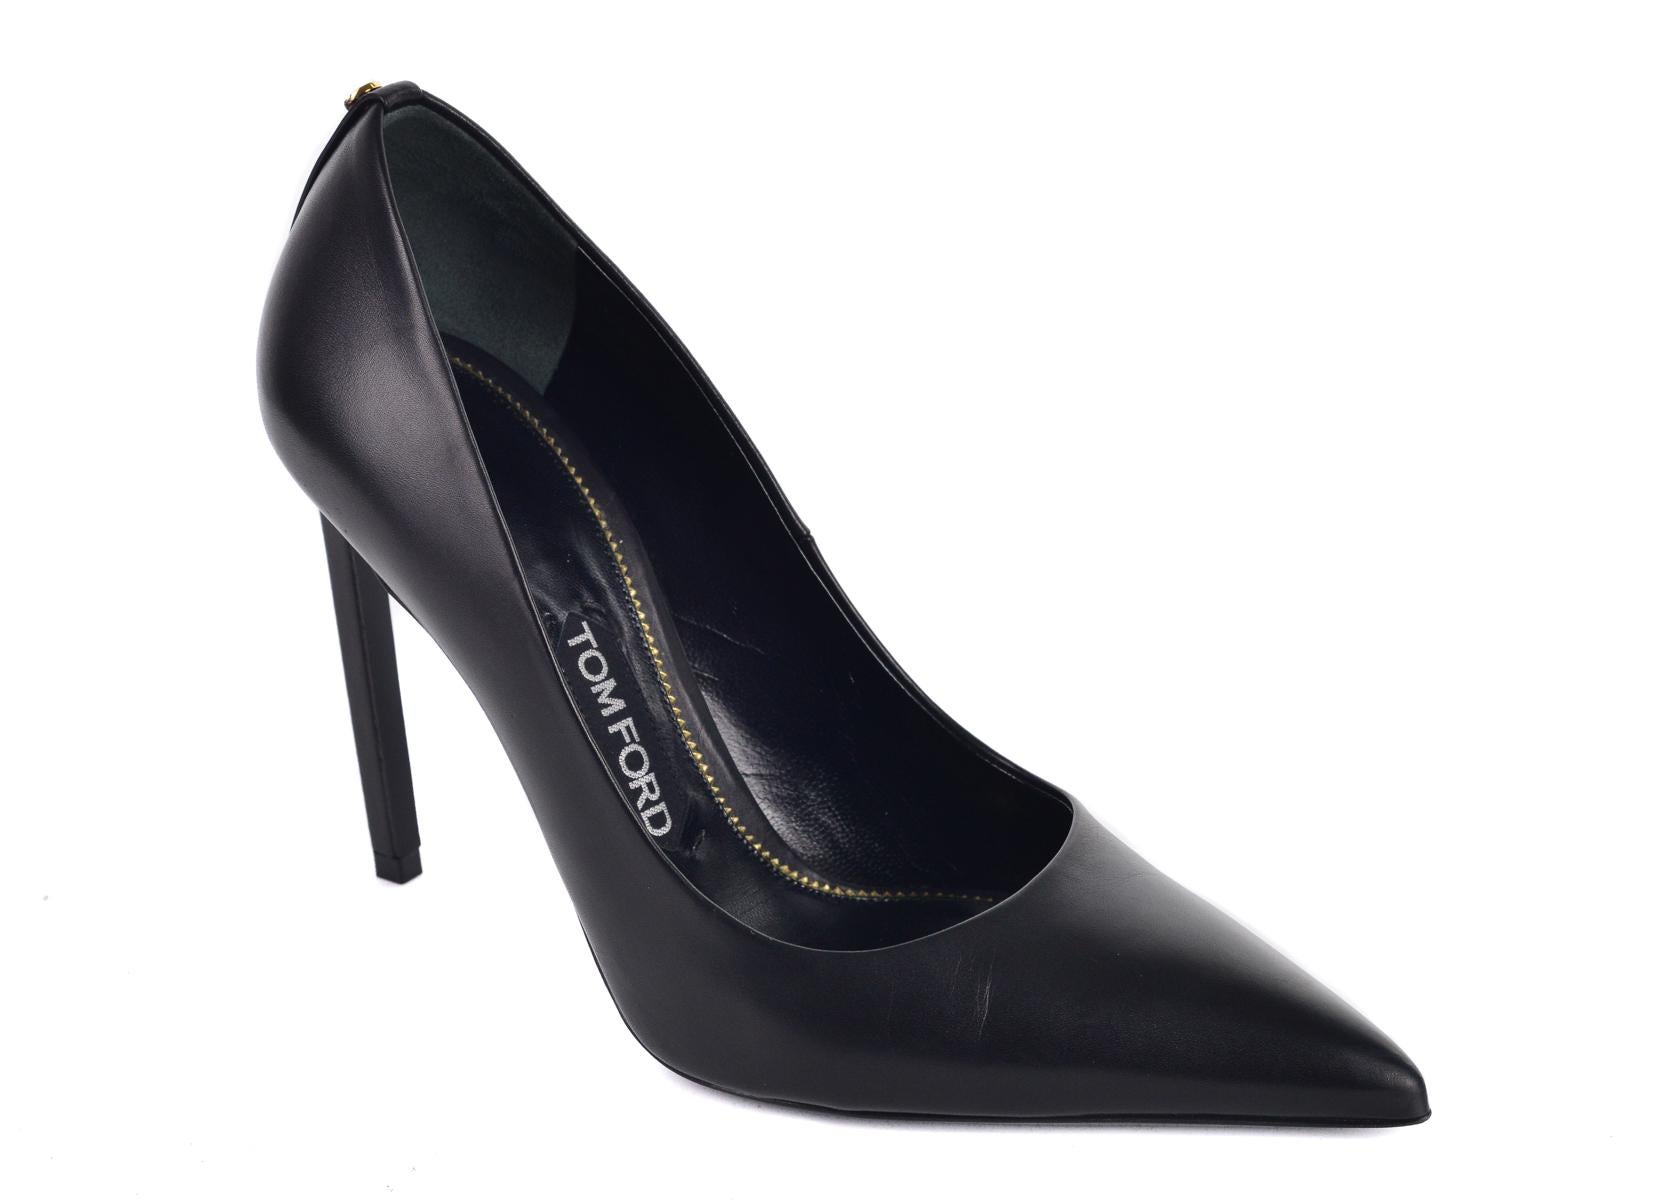 Tom Ford's classic leather pumps. These timeless leather pumps are a classic pair of shoes for all womens wardrobe. Suitable and versatile for all occassions, they are the perfect go to pumps. Pair them up or down with denim jeans or slacks for a